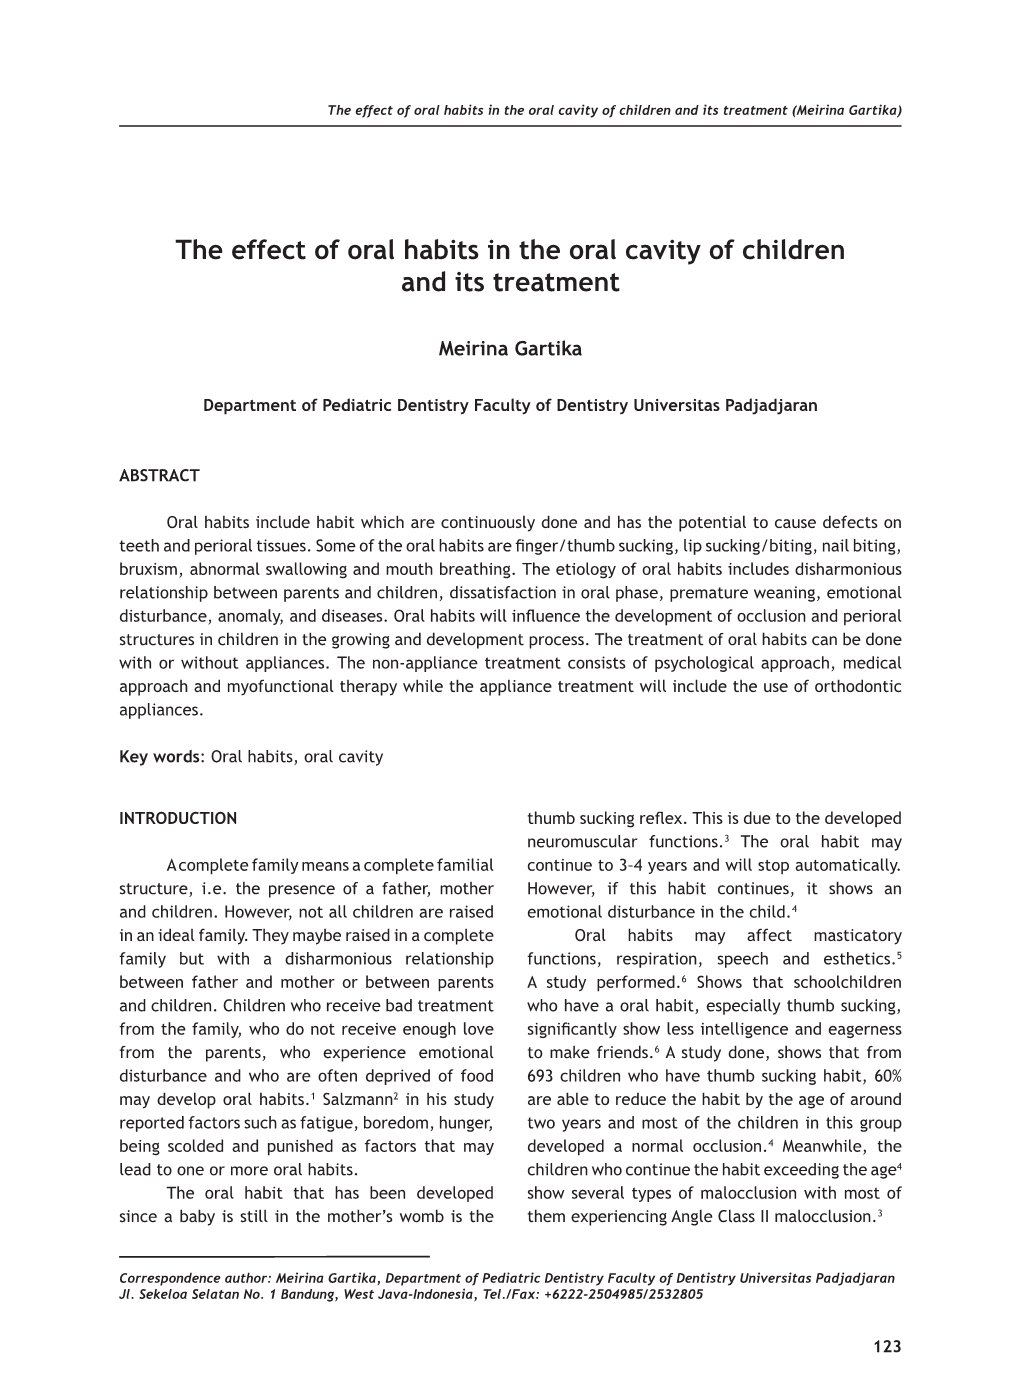 The Effect of Oral Habits in the Oral Cavity of Children and Its Treatment (Meirina Gartika)